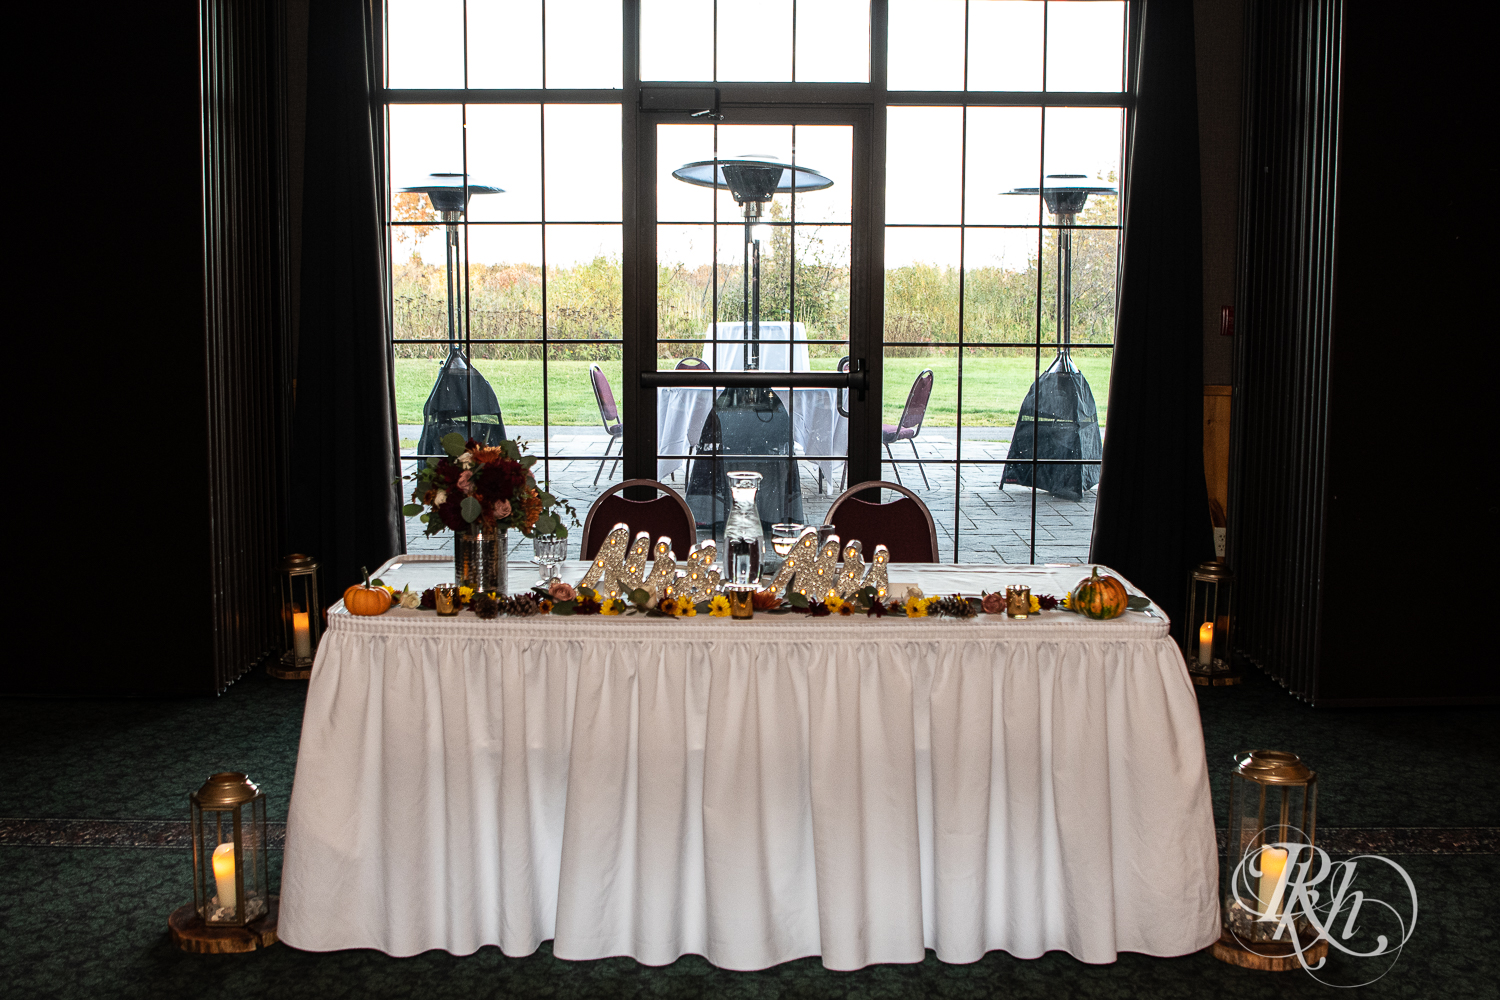 Indoor wedding reception sweetheart table at Superior Shores Resort in Two Harbors, Minnesota.